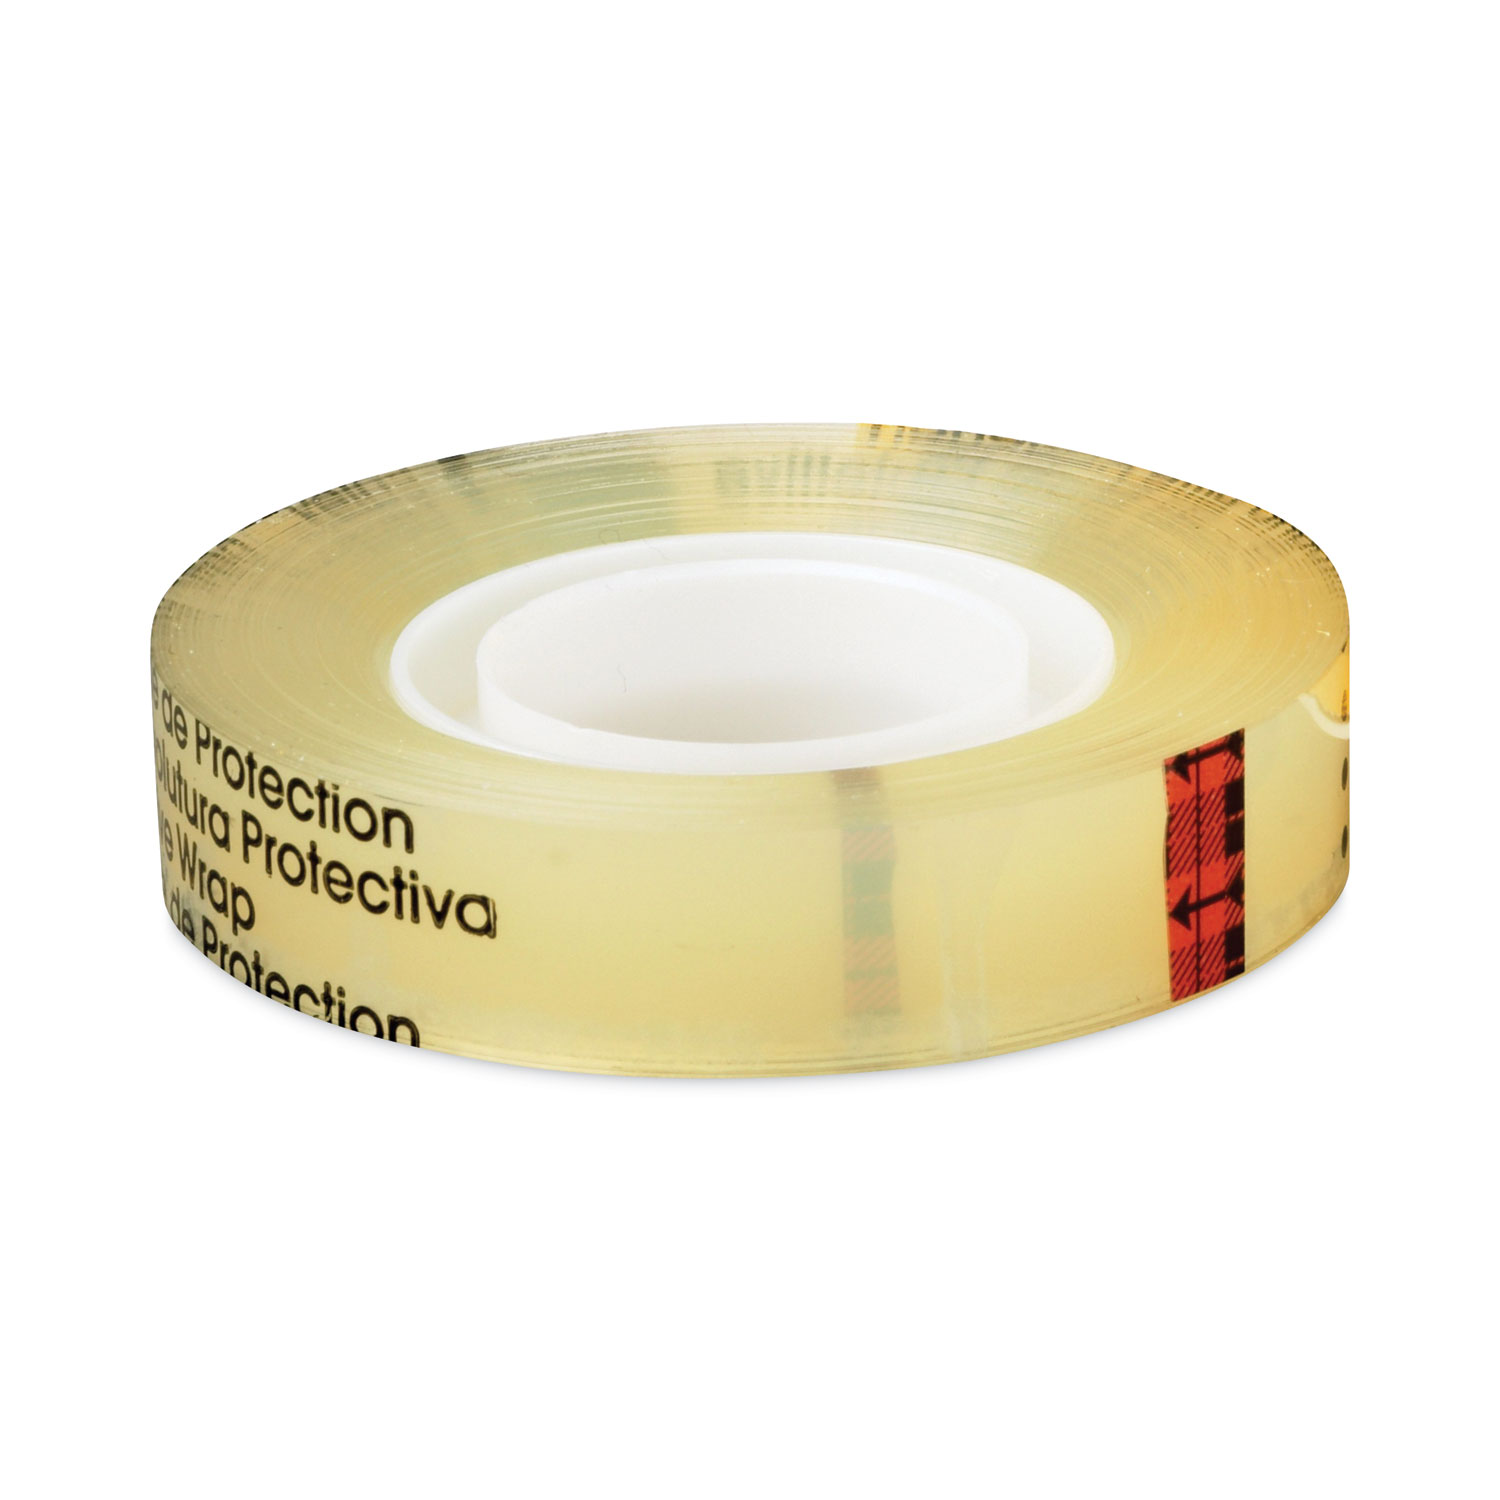 1371.) Scotch Double Sided Photo Tape- MCO 136